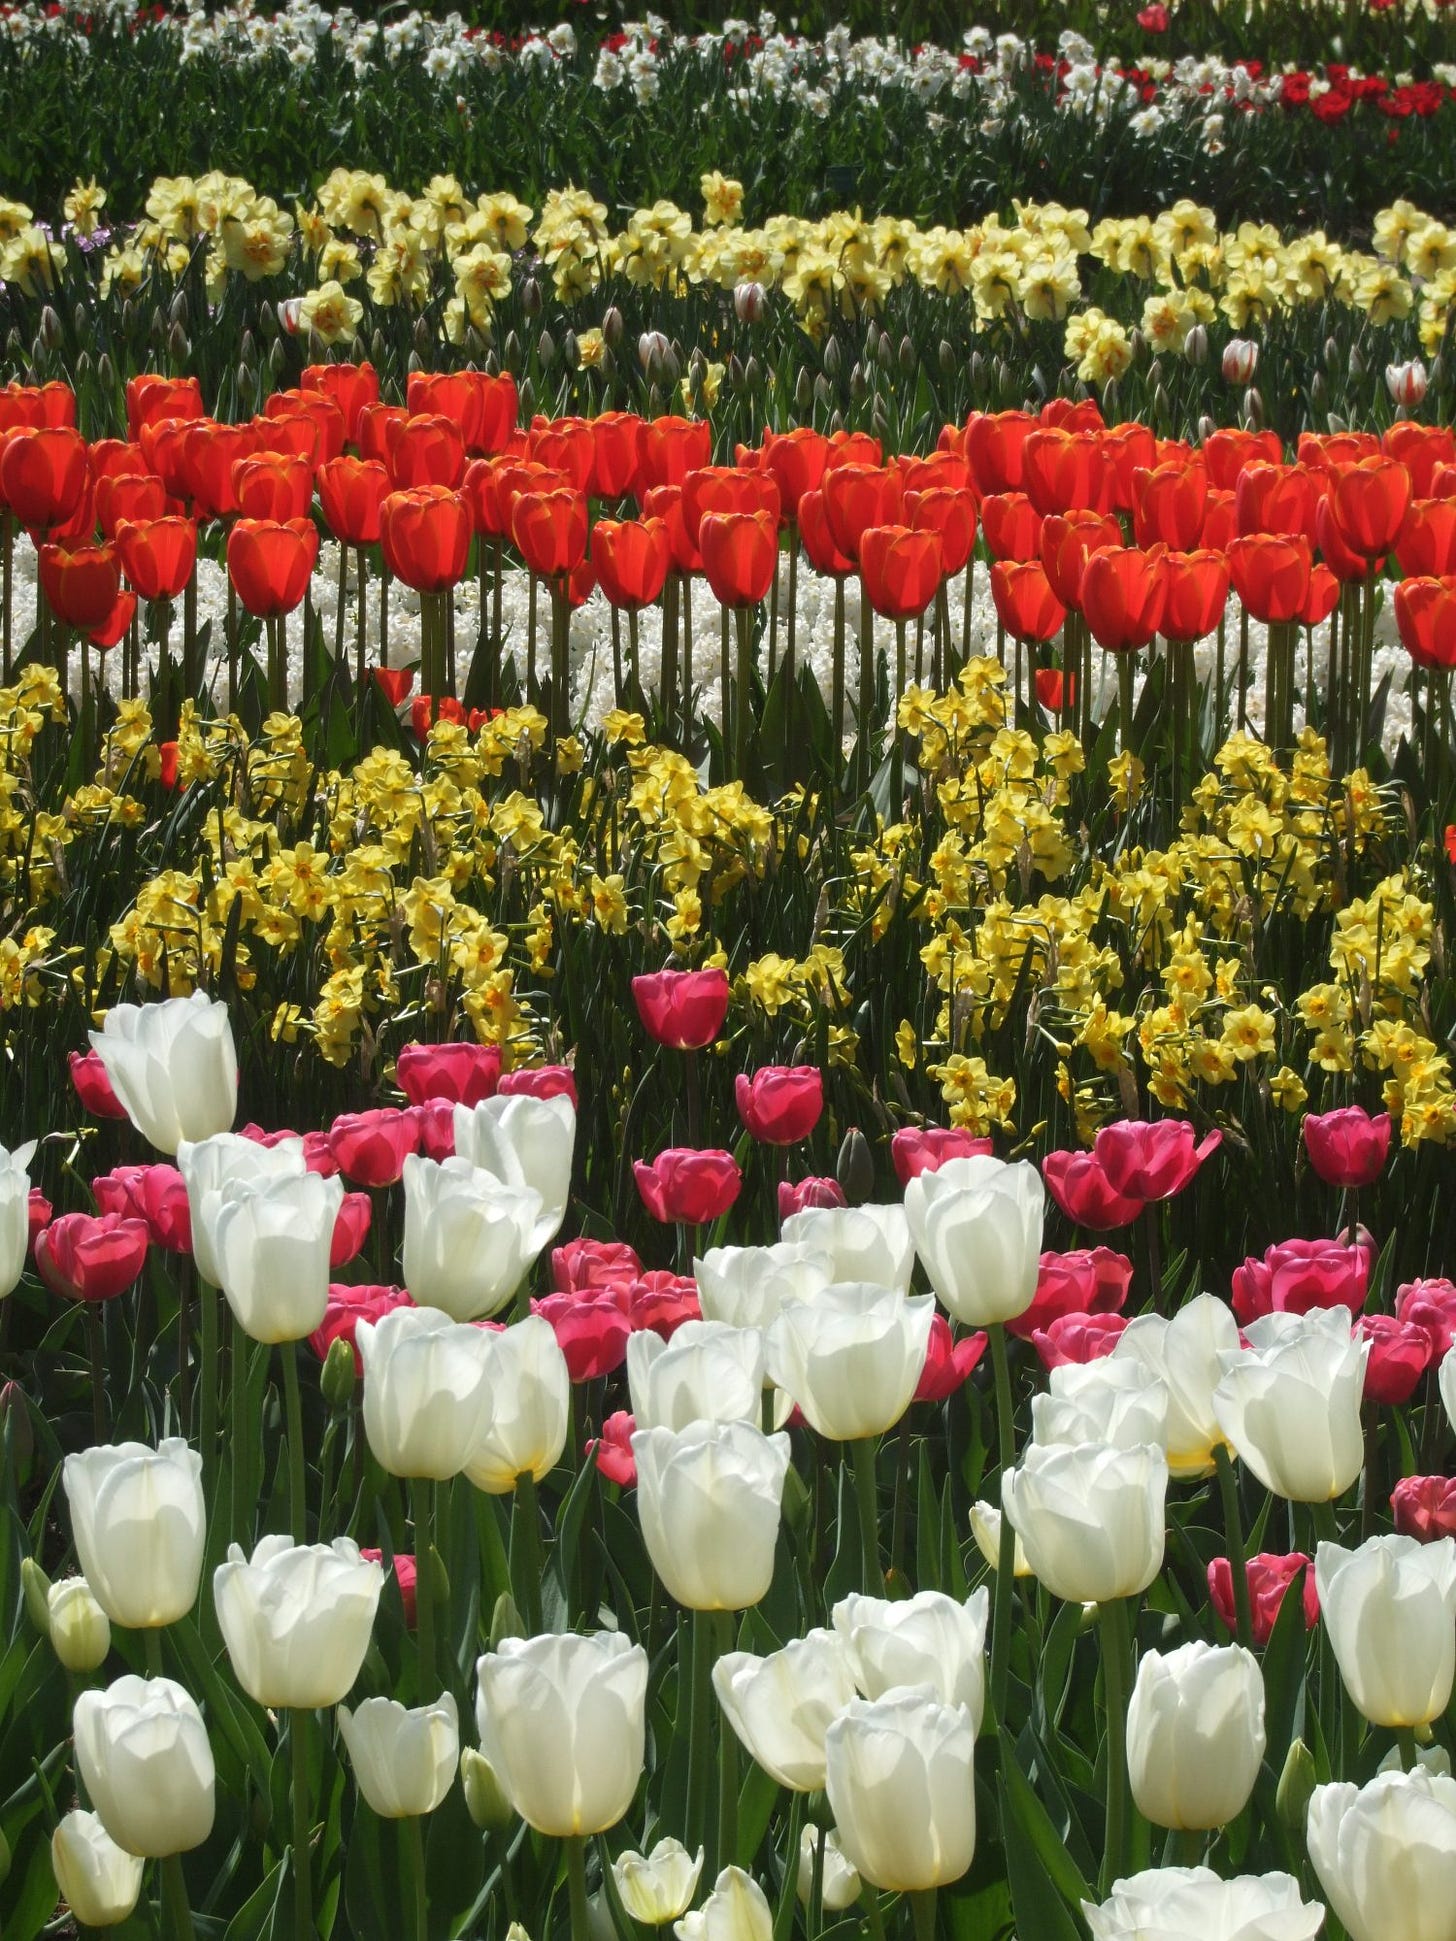 Rows of colorful tulips